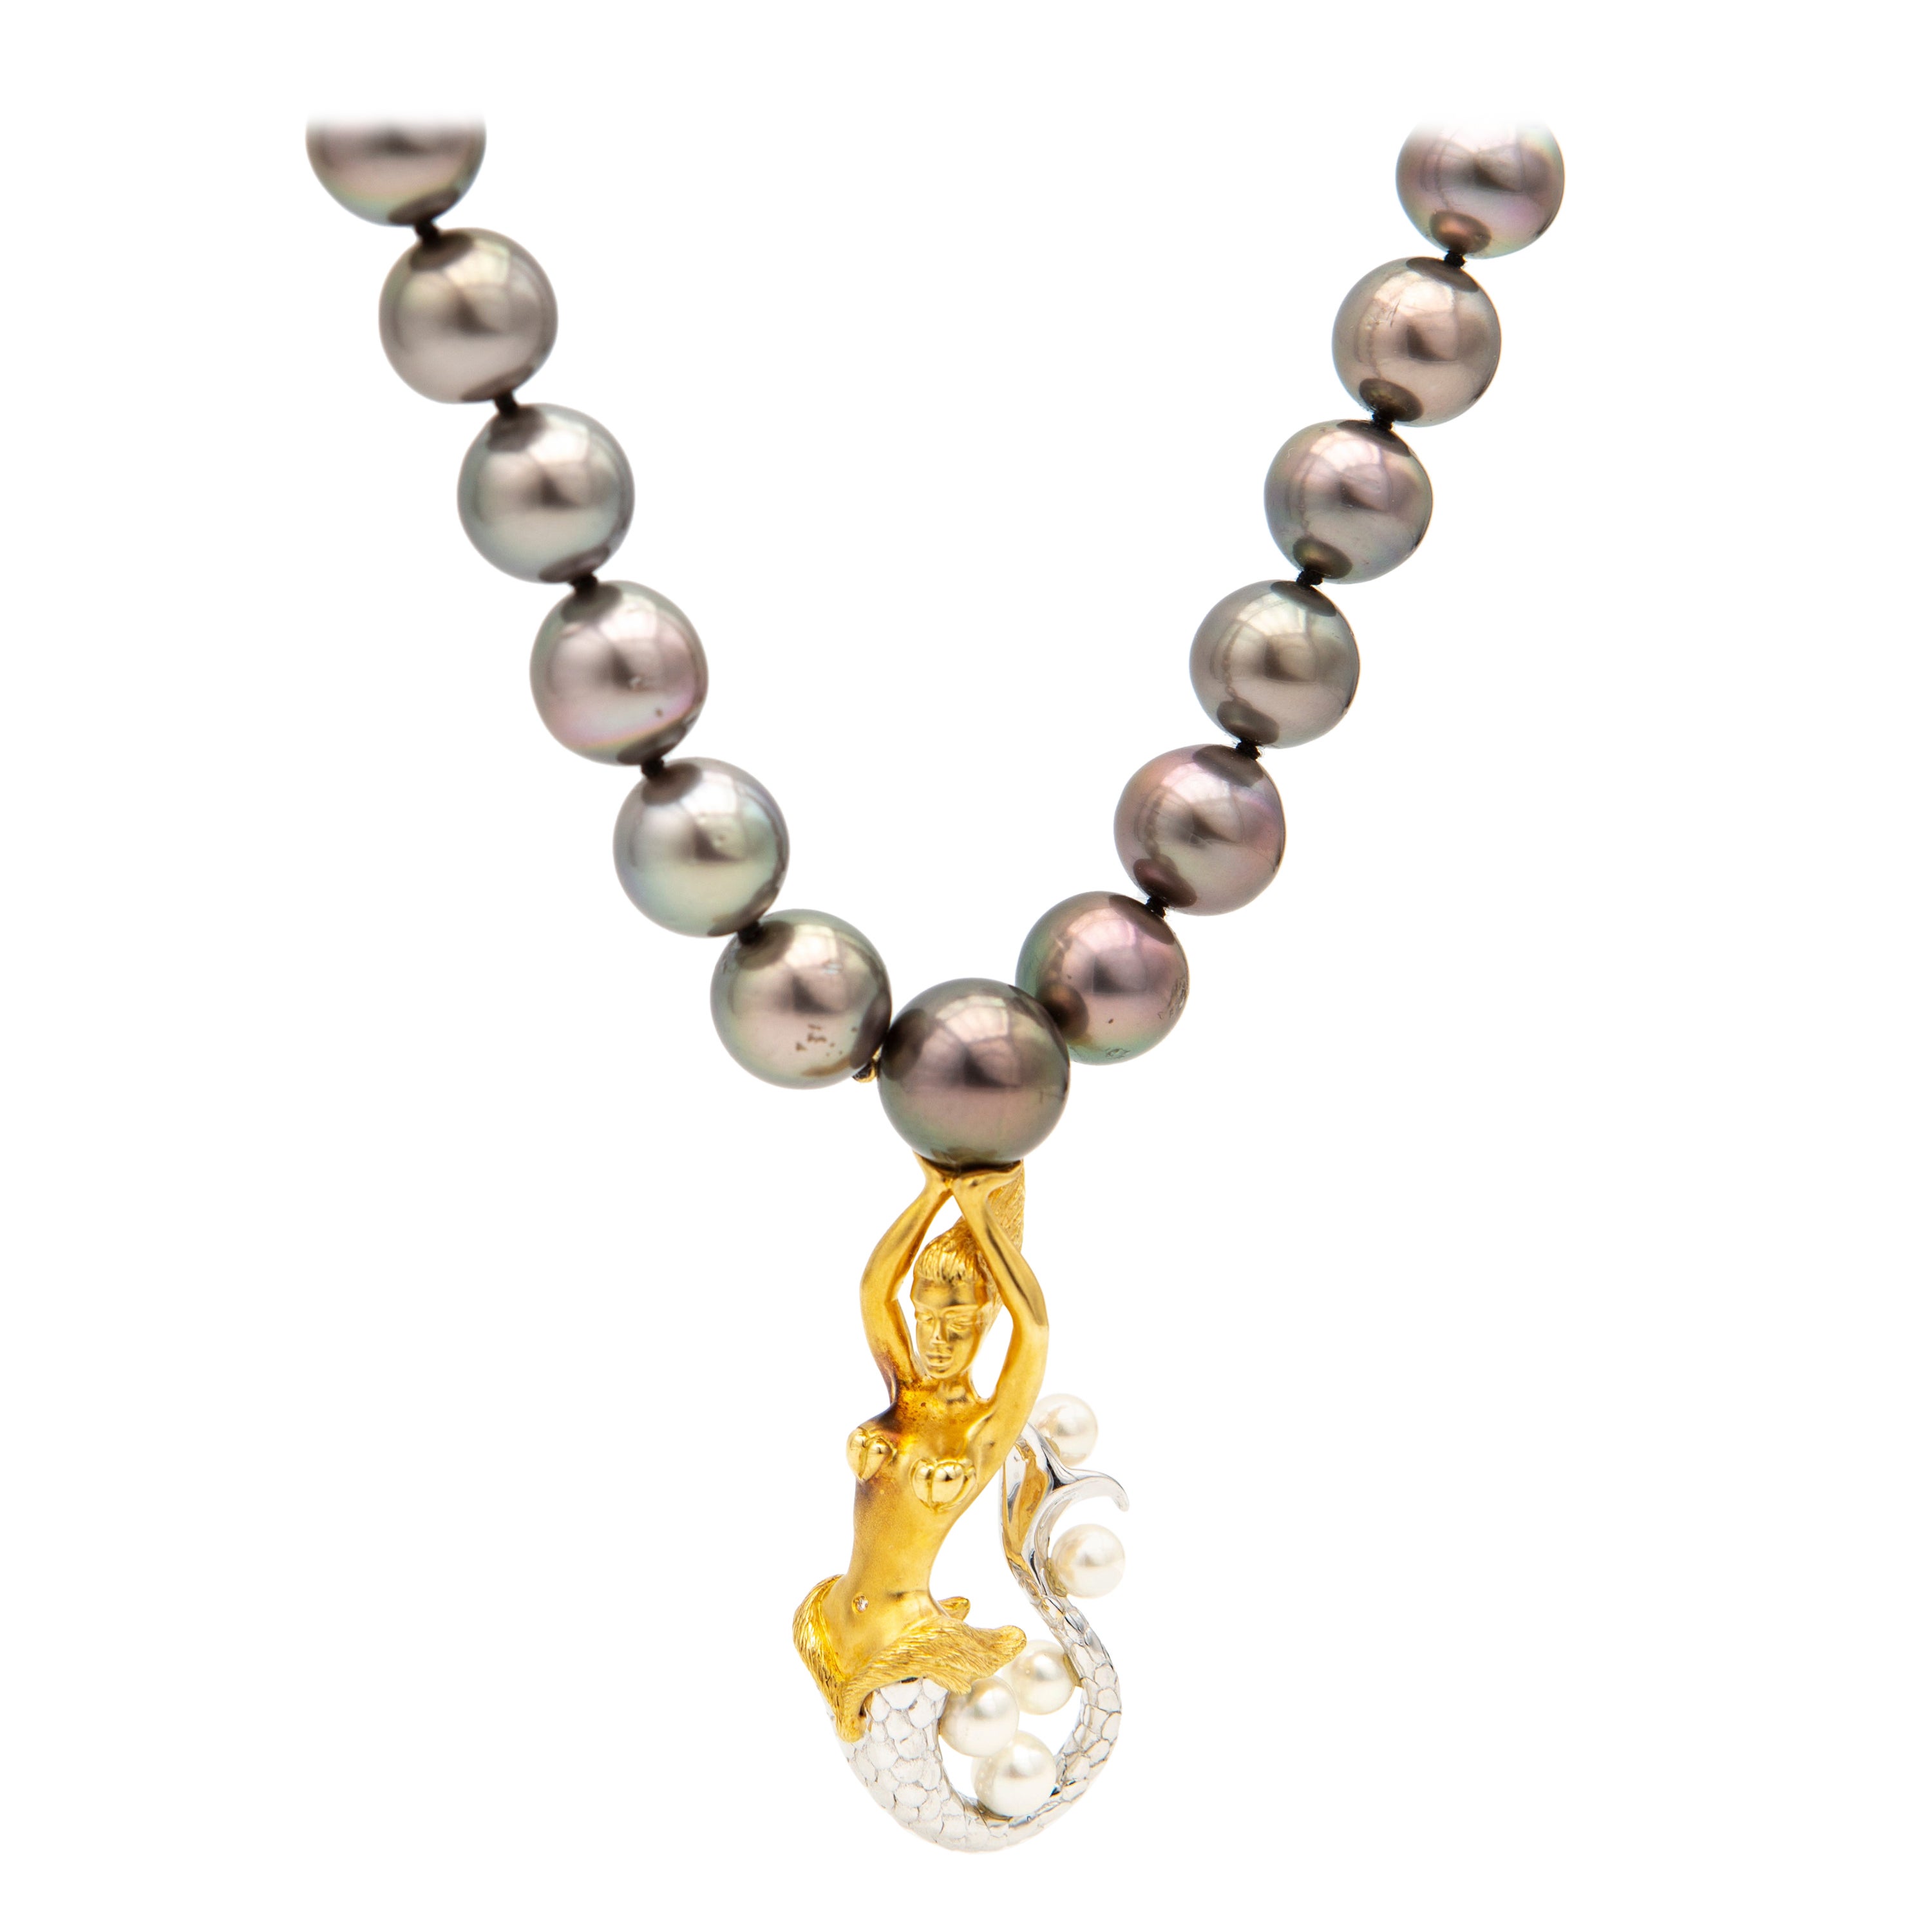 18kt White and Rose Gold Mermaid Pendant Necklace with Tahiti and Akoya Pearls For Sale